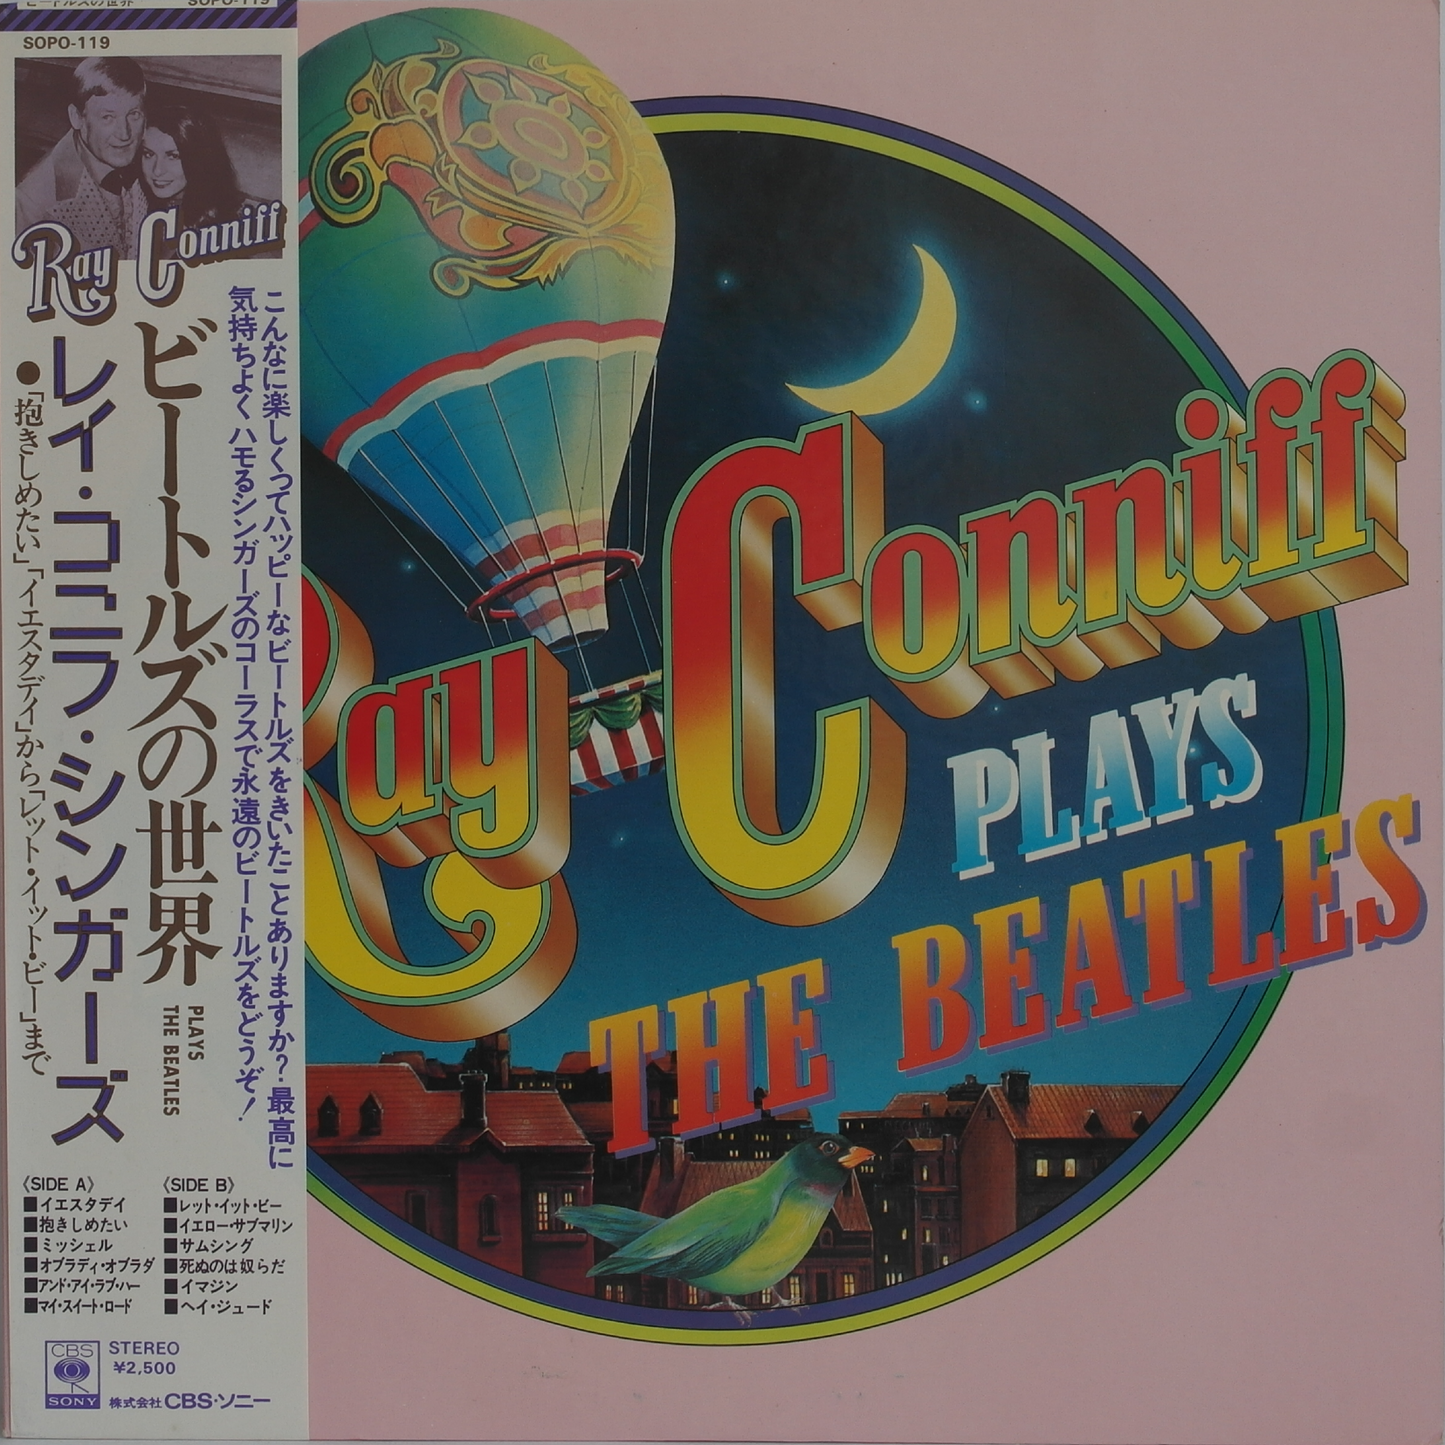 RAY CONNIFF AND THE SINGERS - Ray Conniff Plays The Beatles